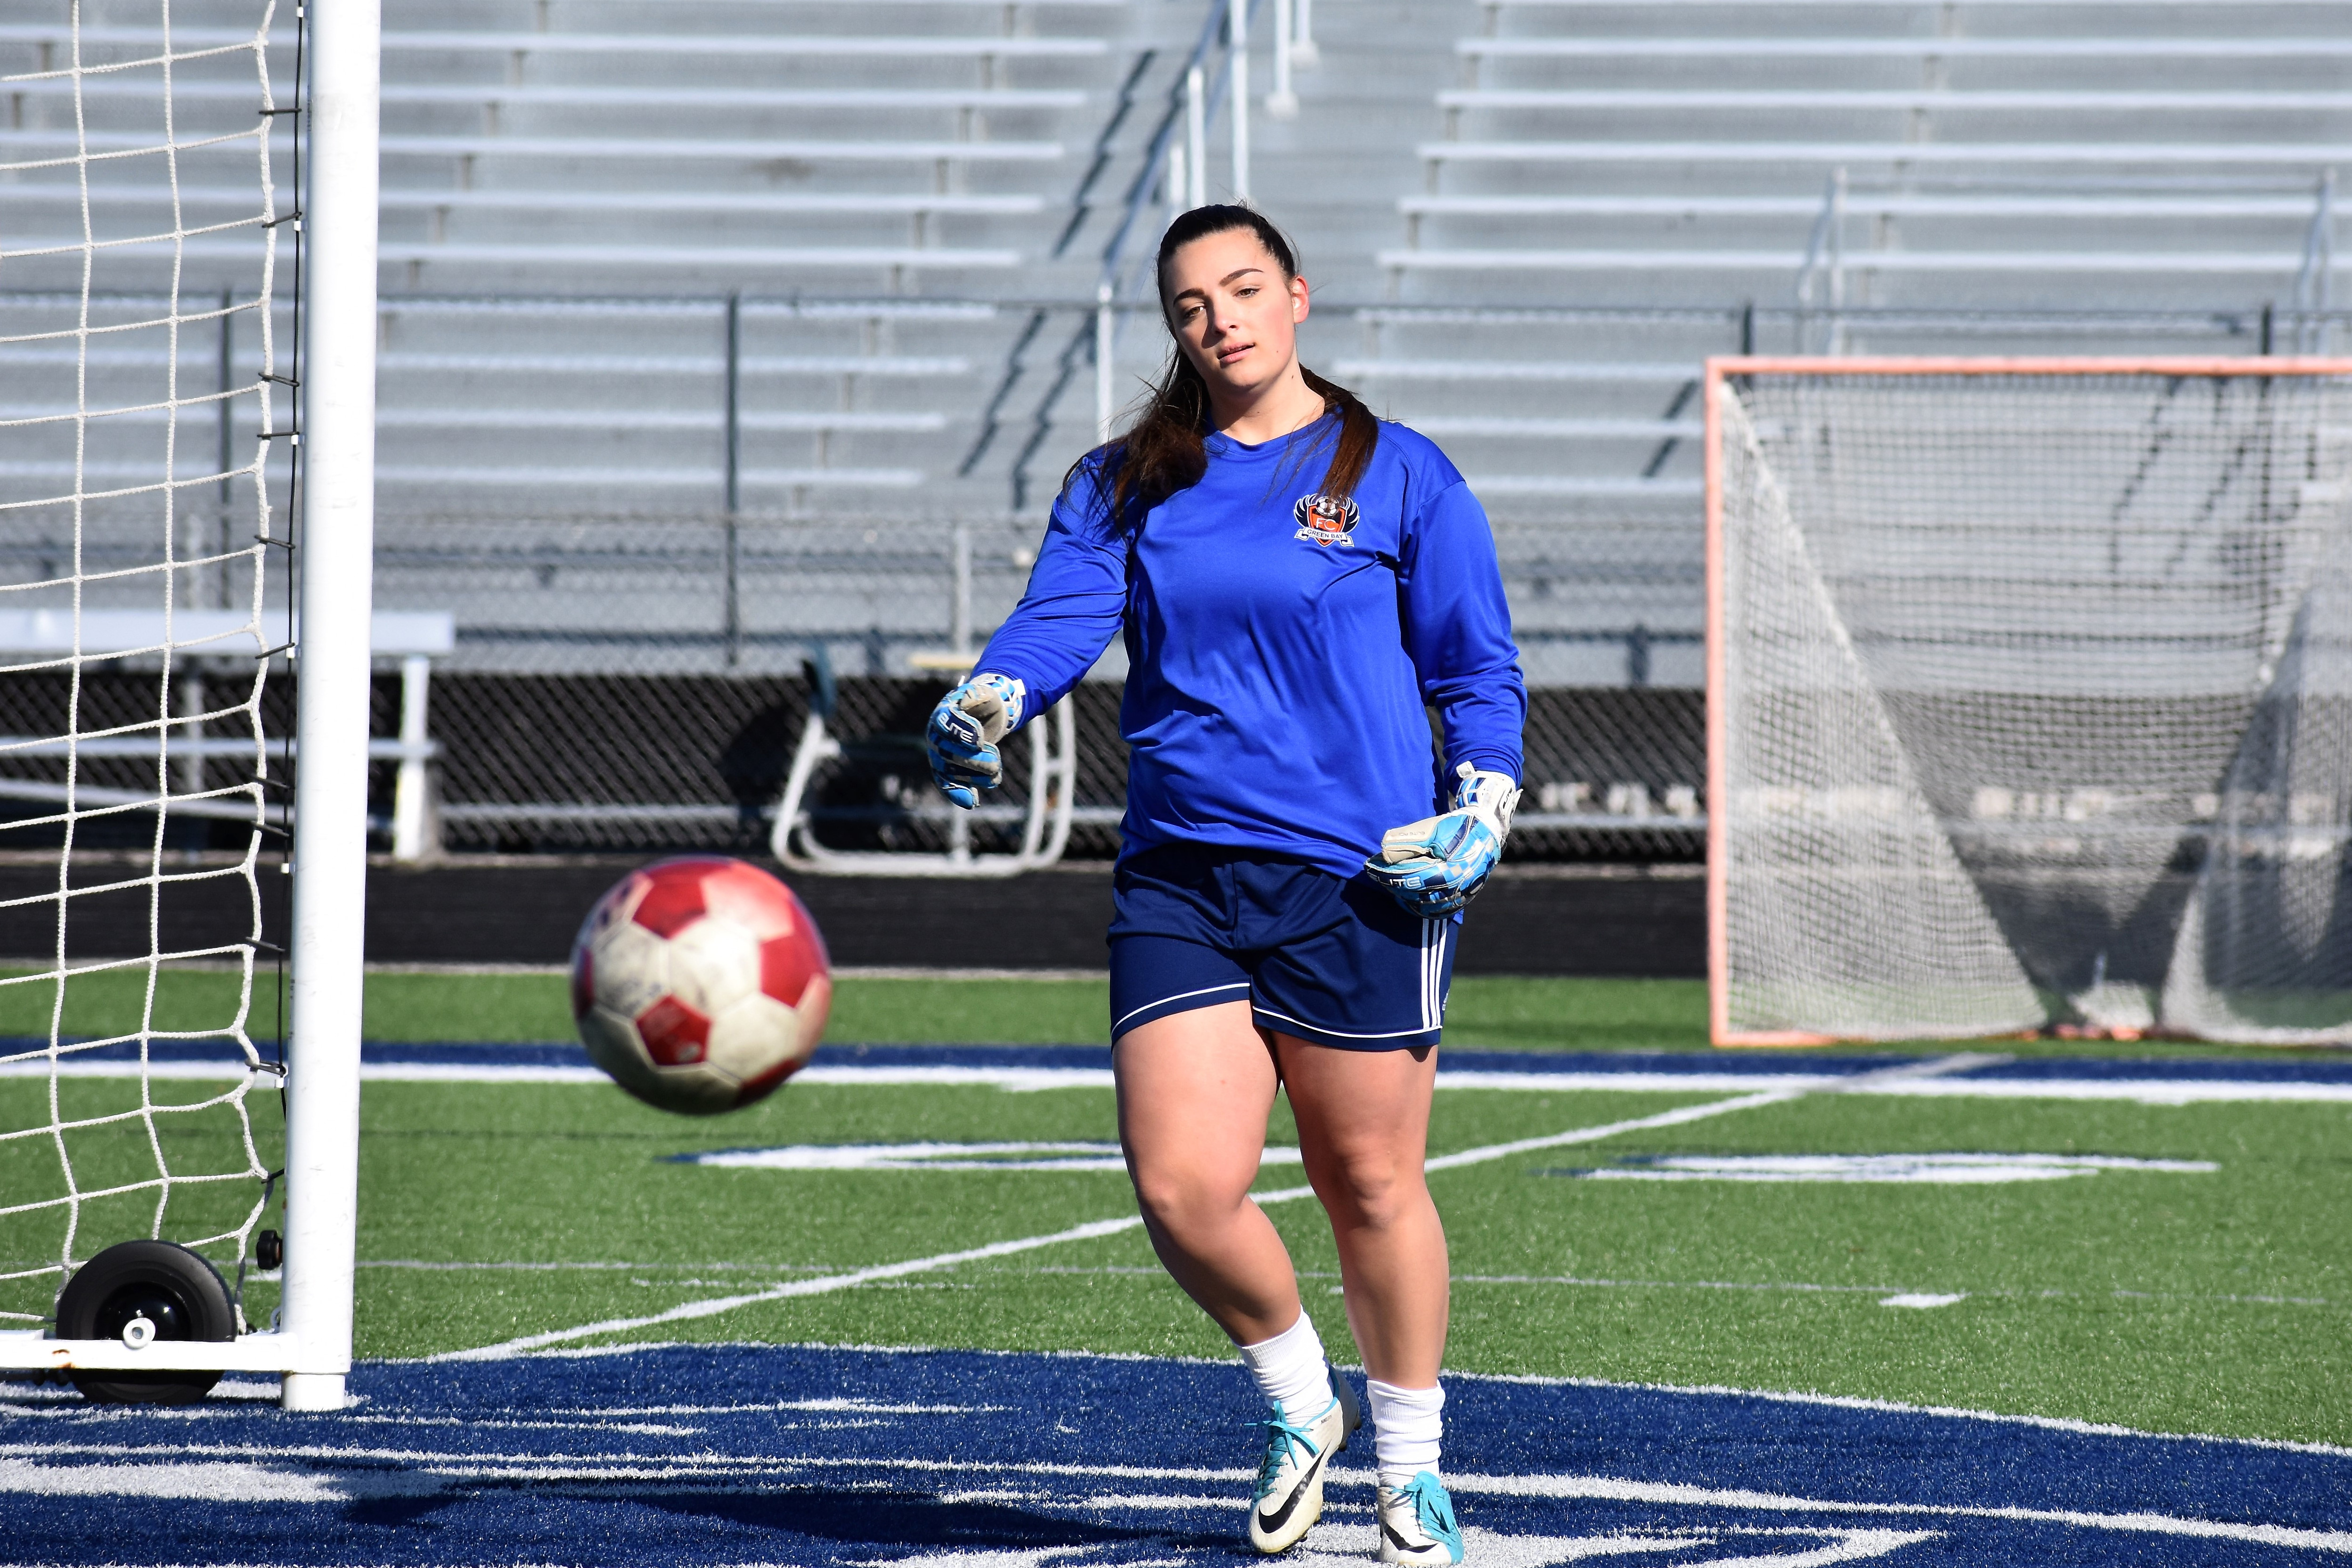 One step up: Bay Port girls soccer preview